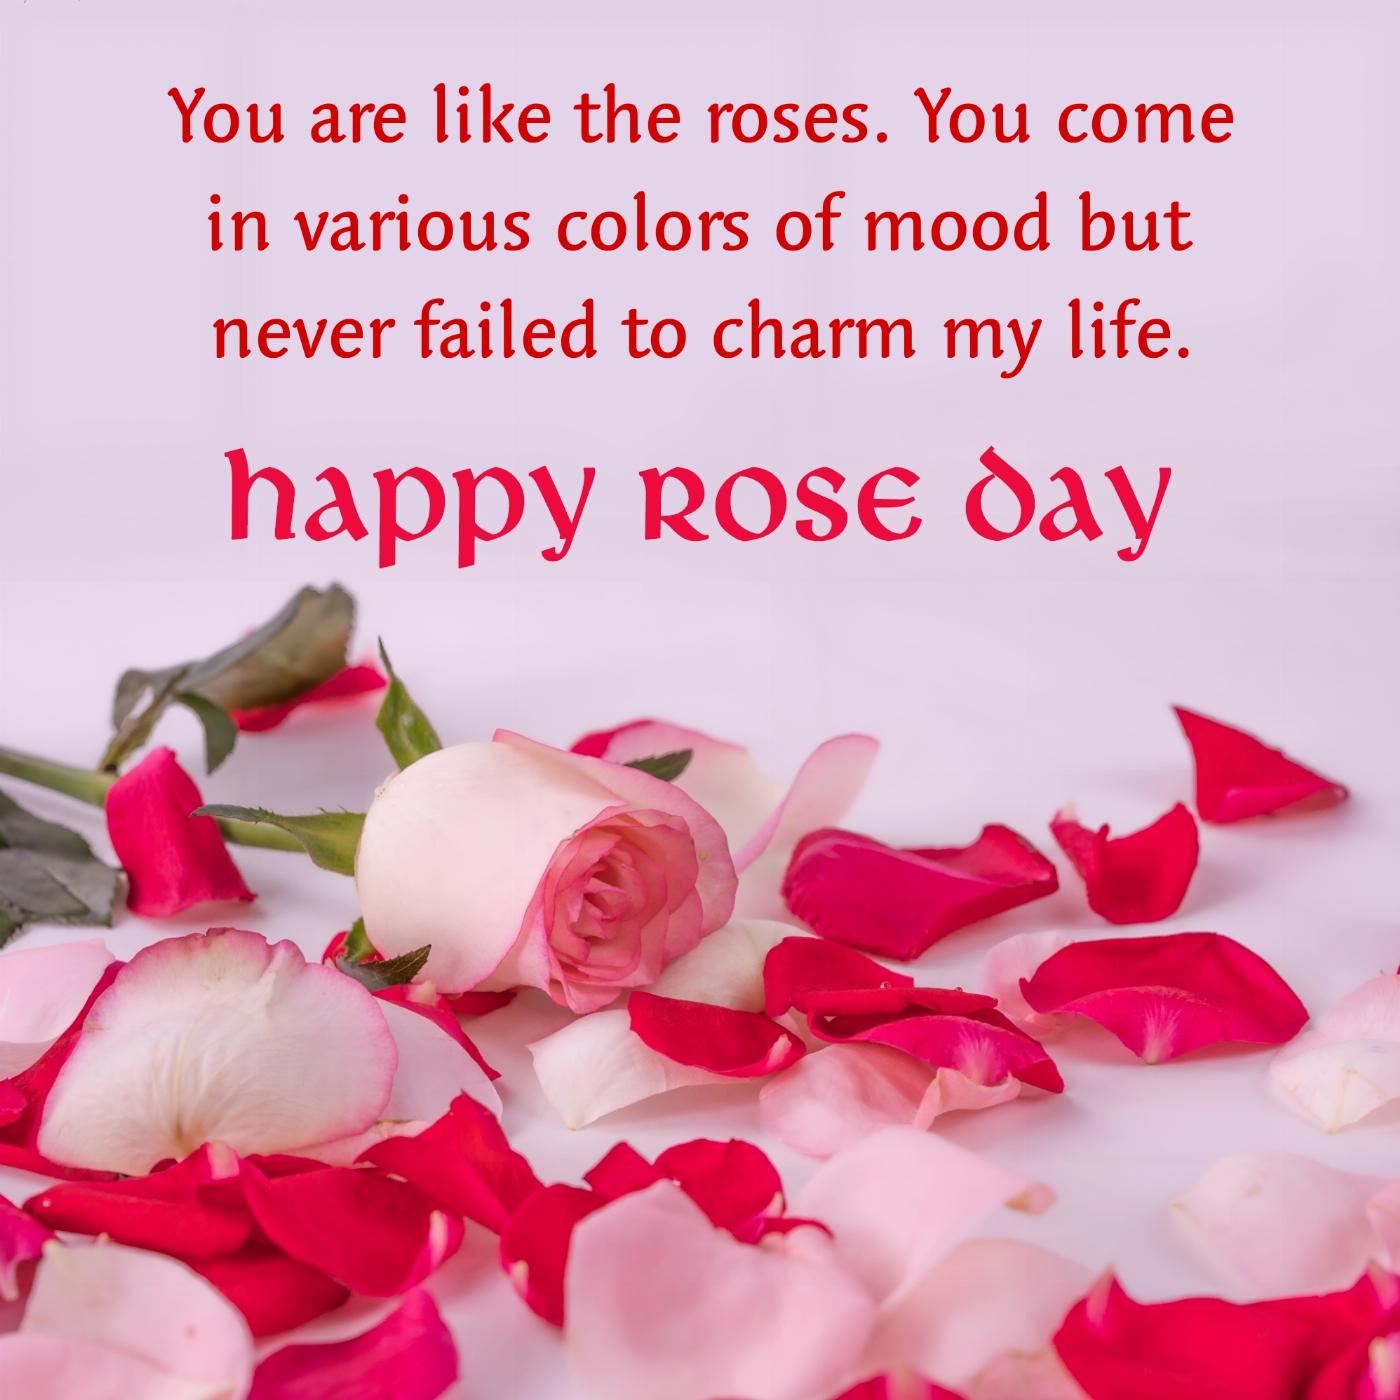 You are like the roses You come in various colors of mood